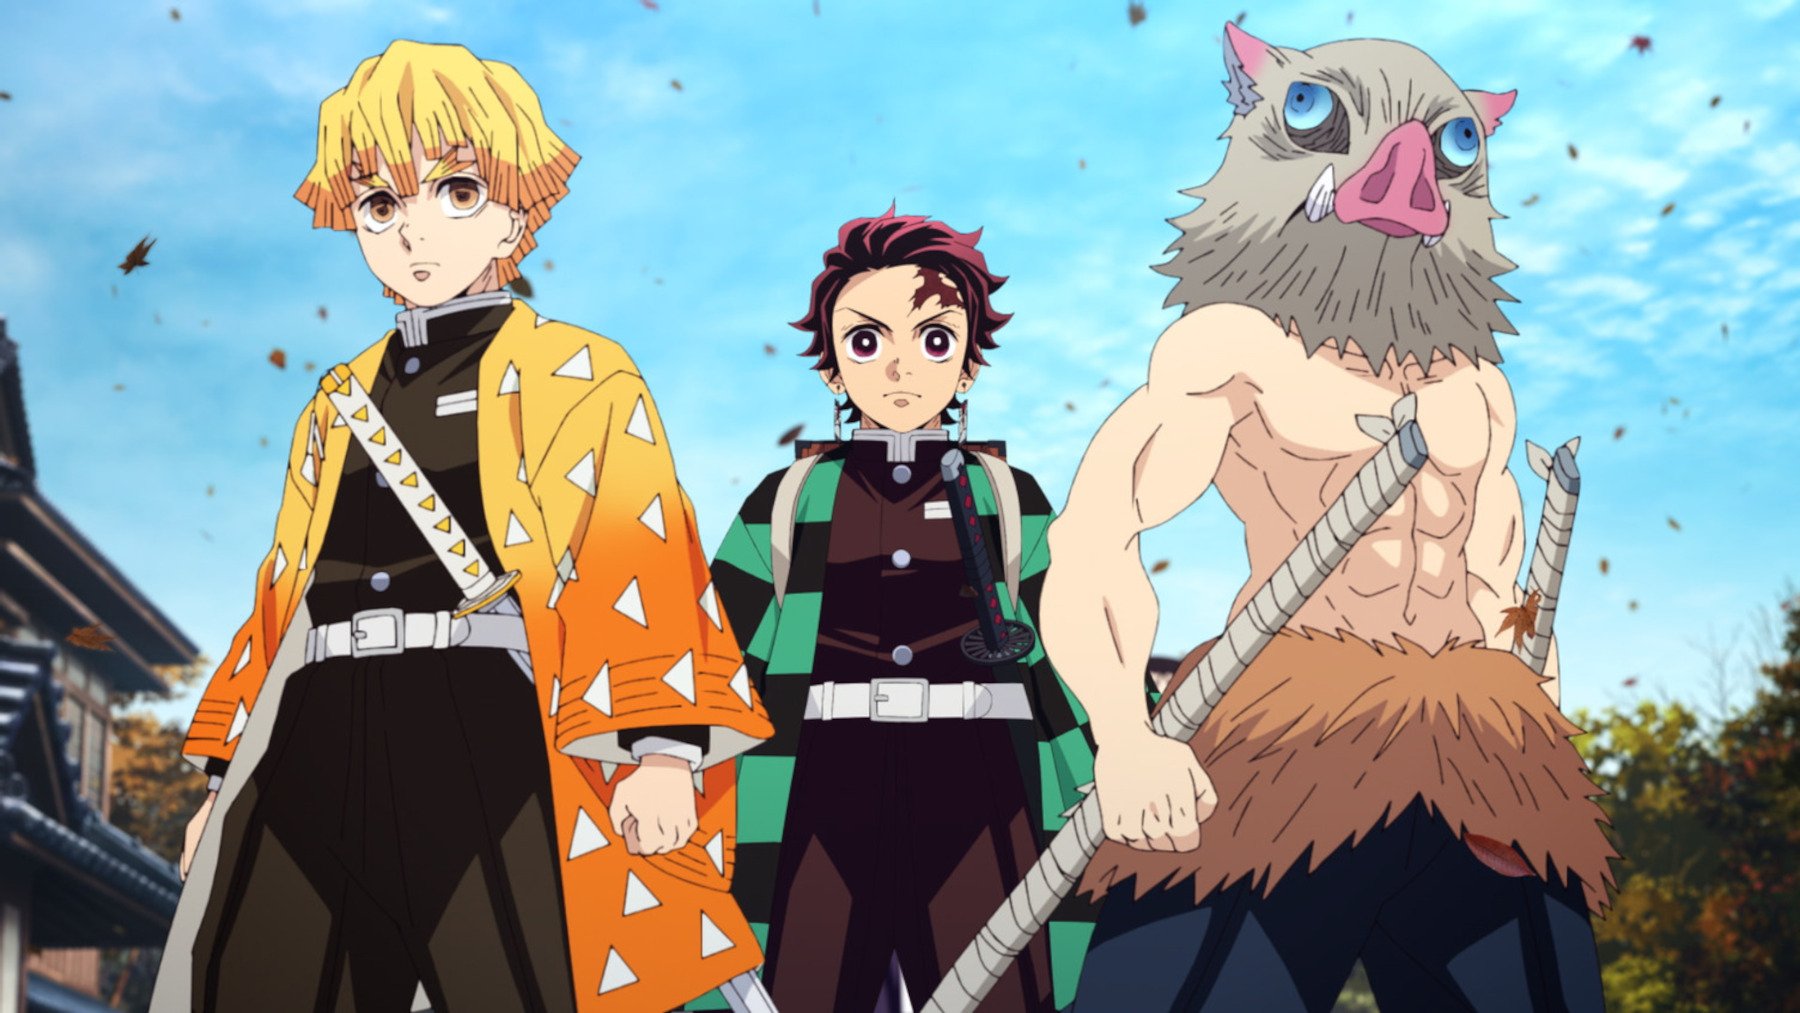 Zenitsu, Tanjiro, and Inosuke in 'Demon Slayer' Season 2's Entertainment District Arc Episode 1. They're standing side by side.